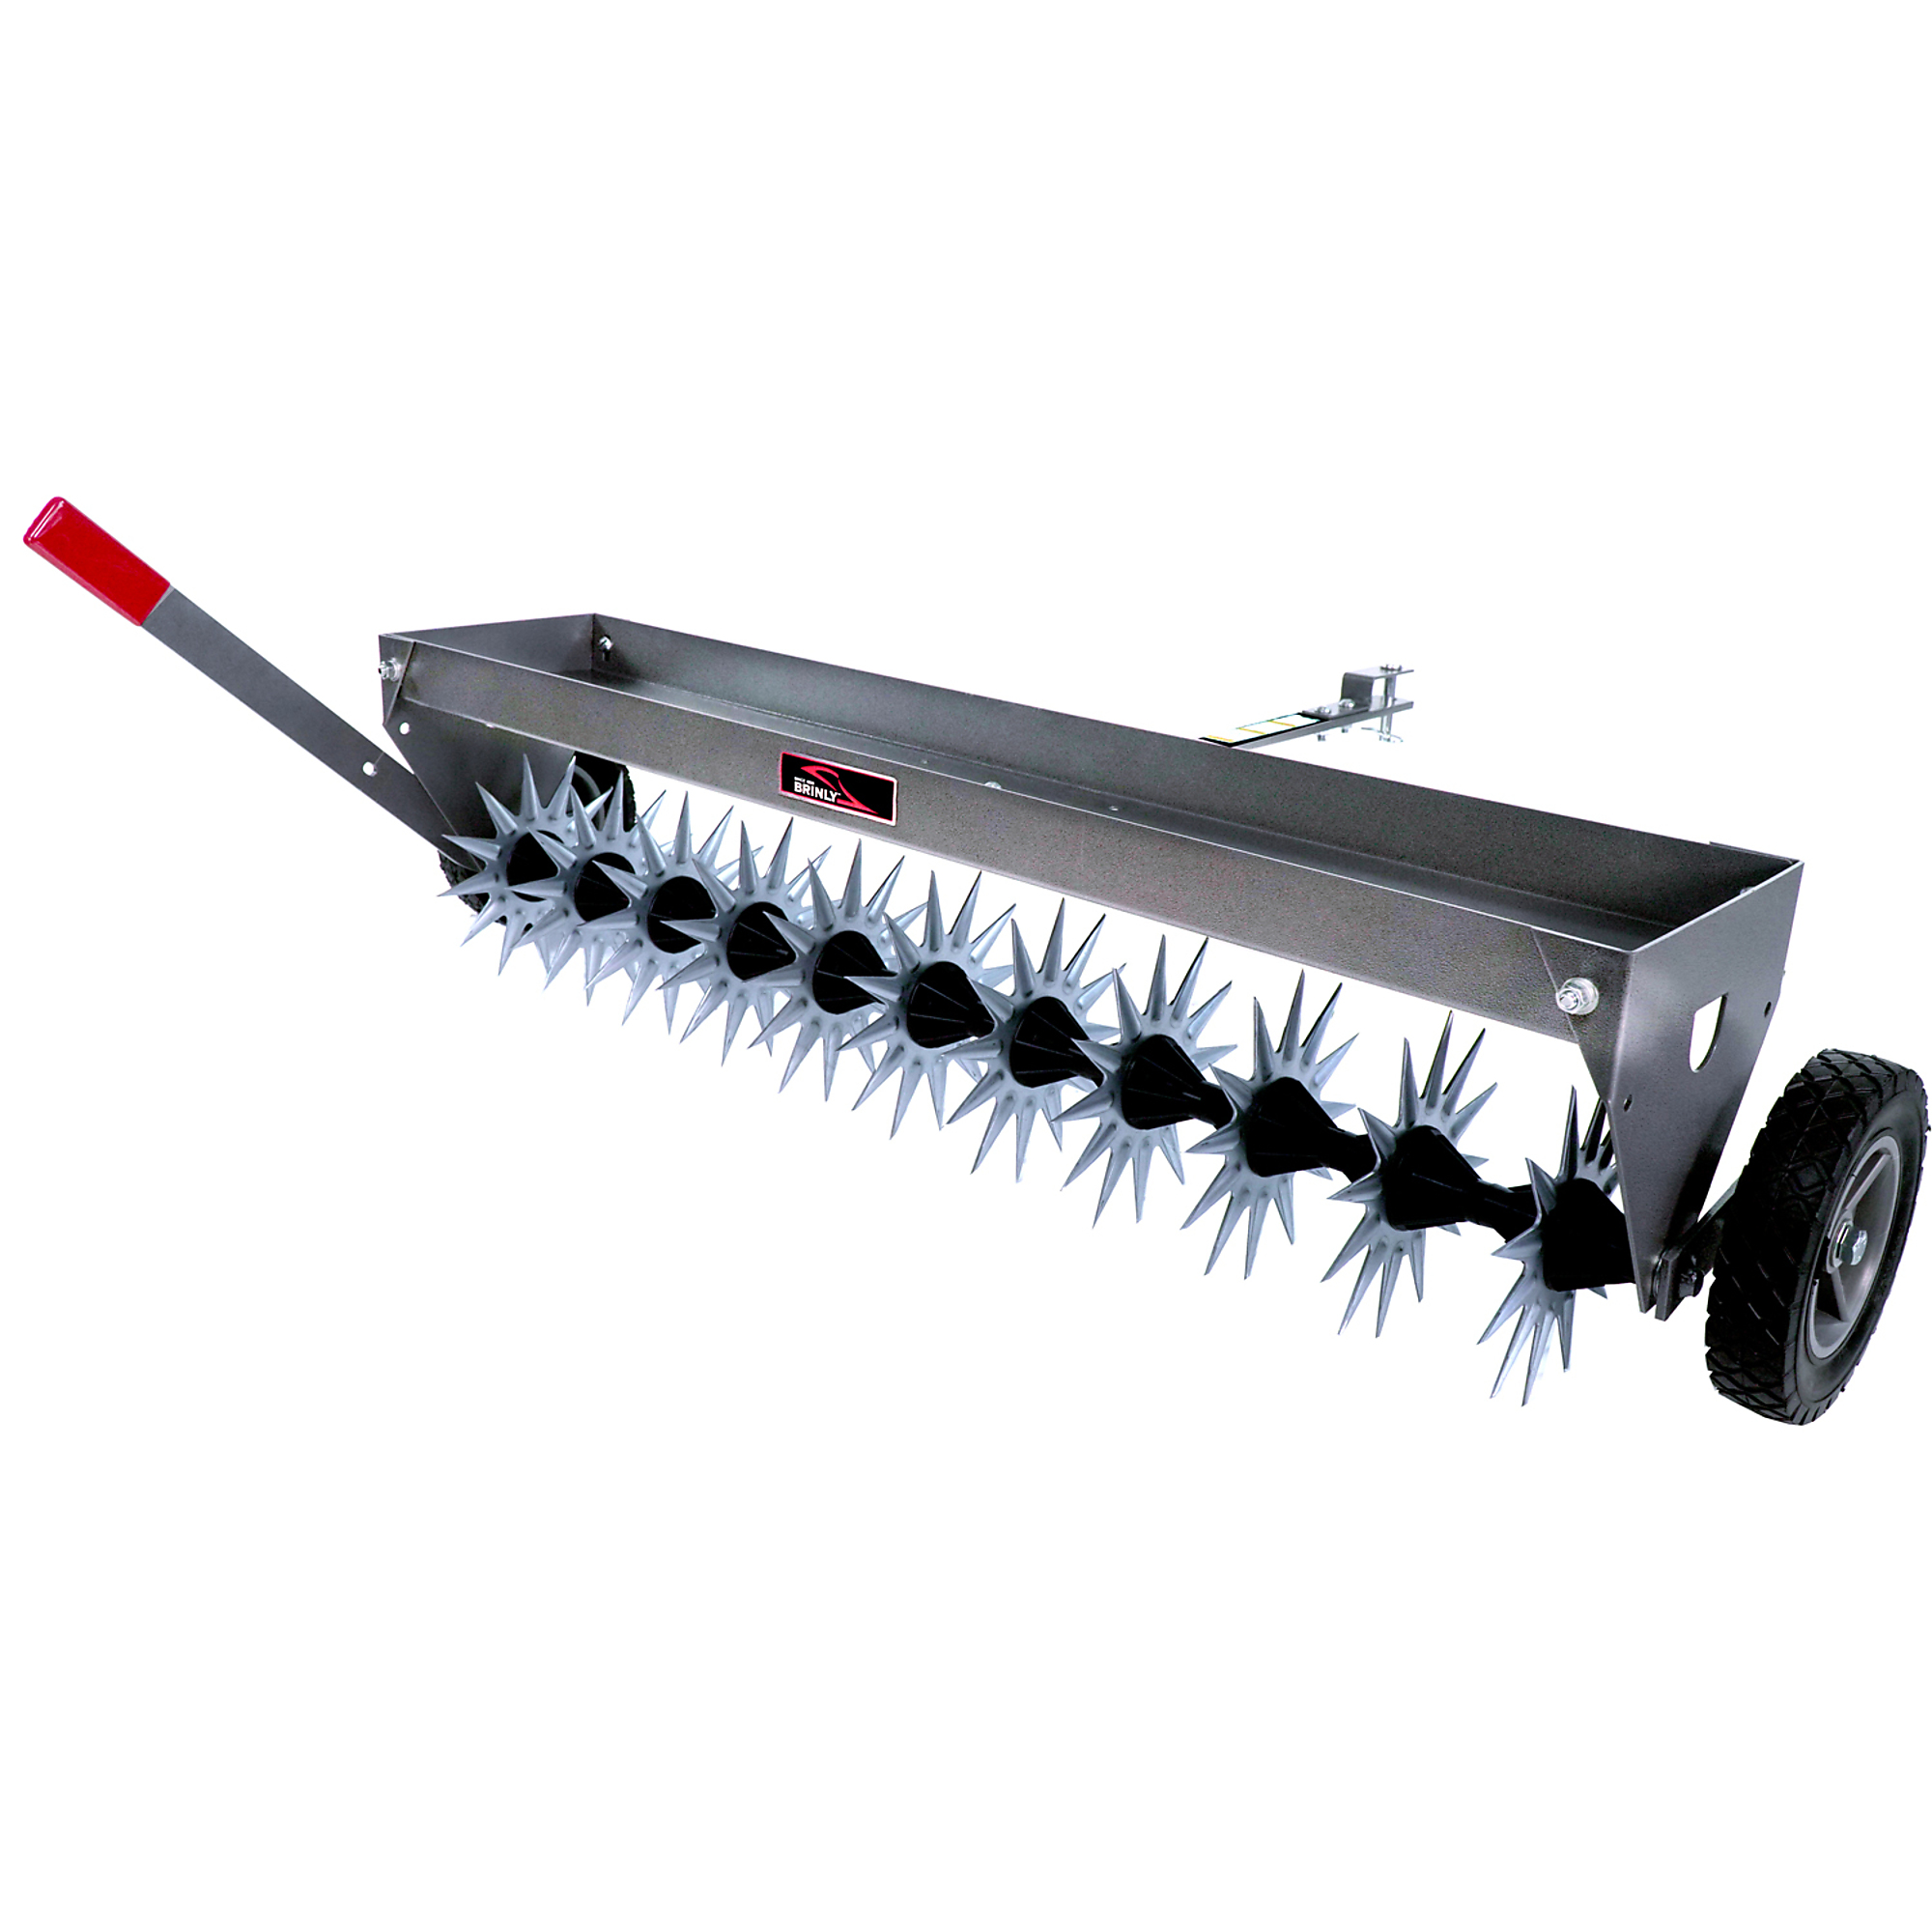 Brinly-Hardy, 40Inch Tow-Behind Spike Aerator, Gunmetal with Wheels, Working Width 40 in, Model SAT2-40BH-S